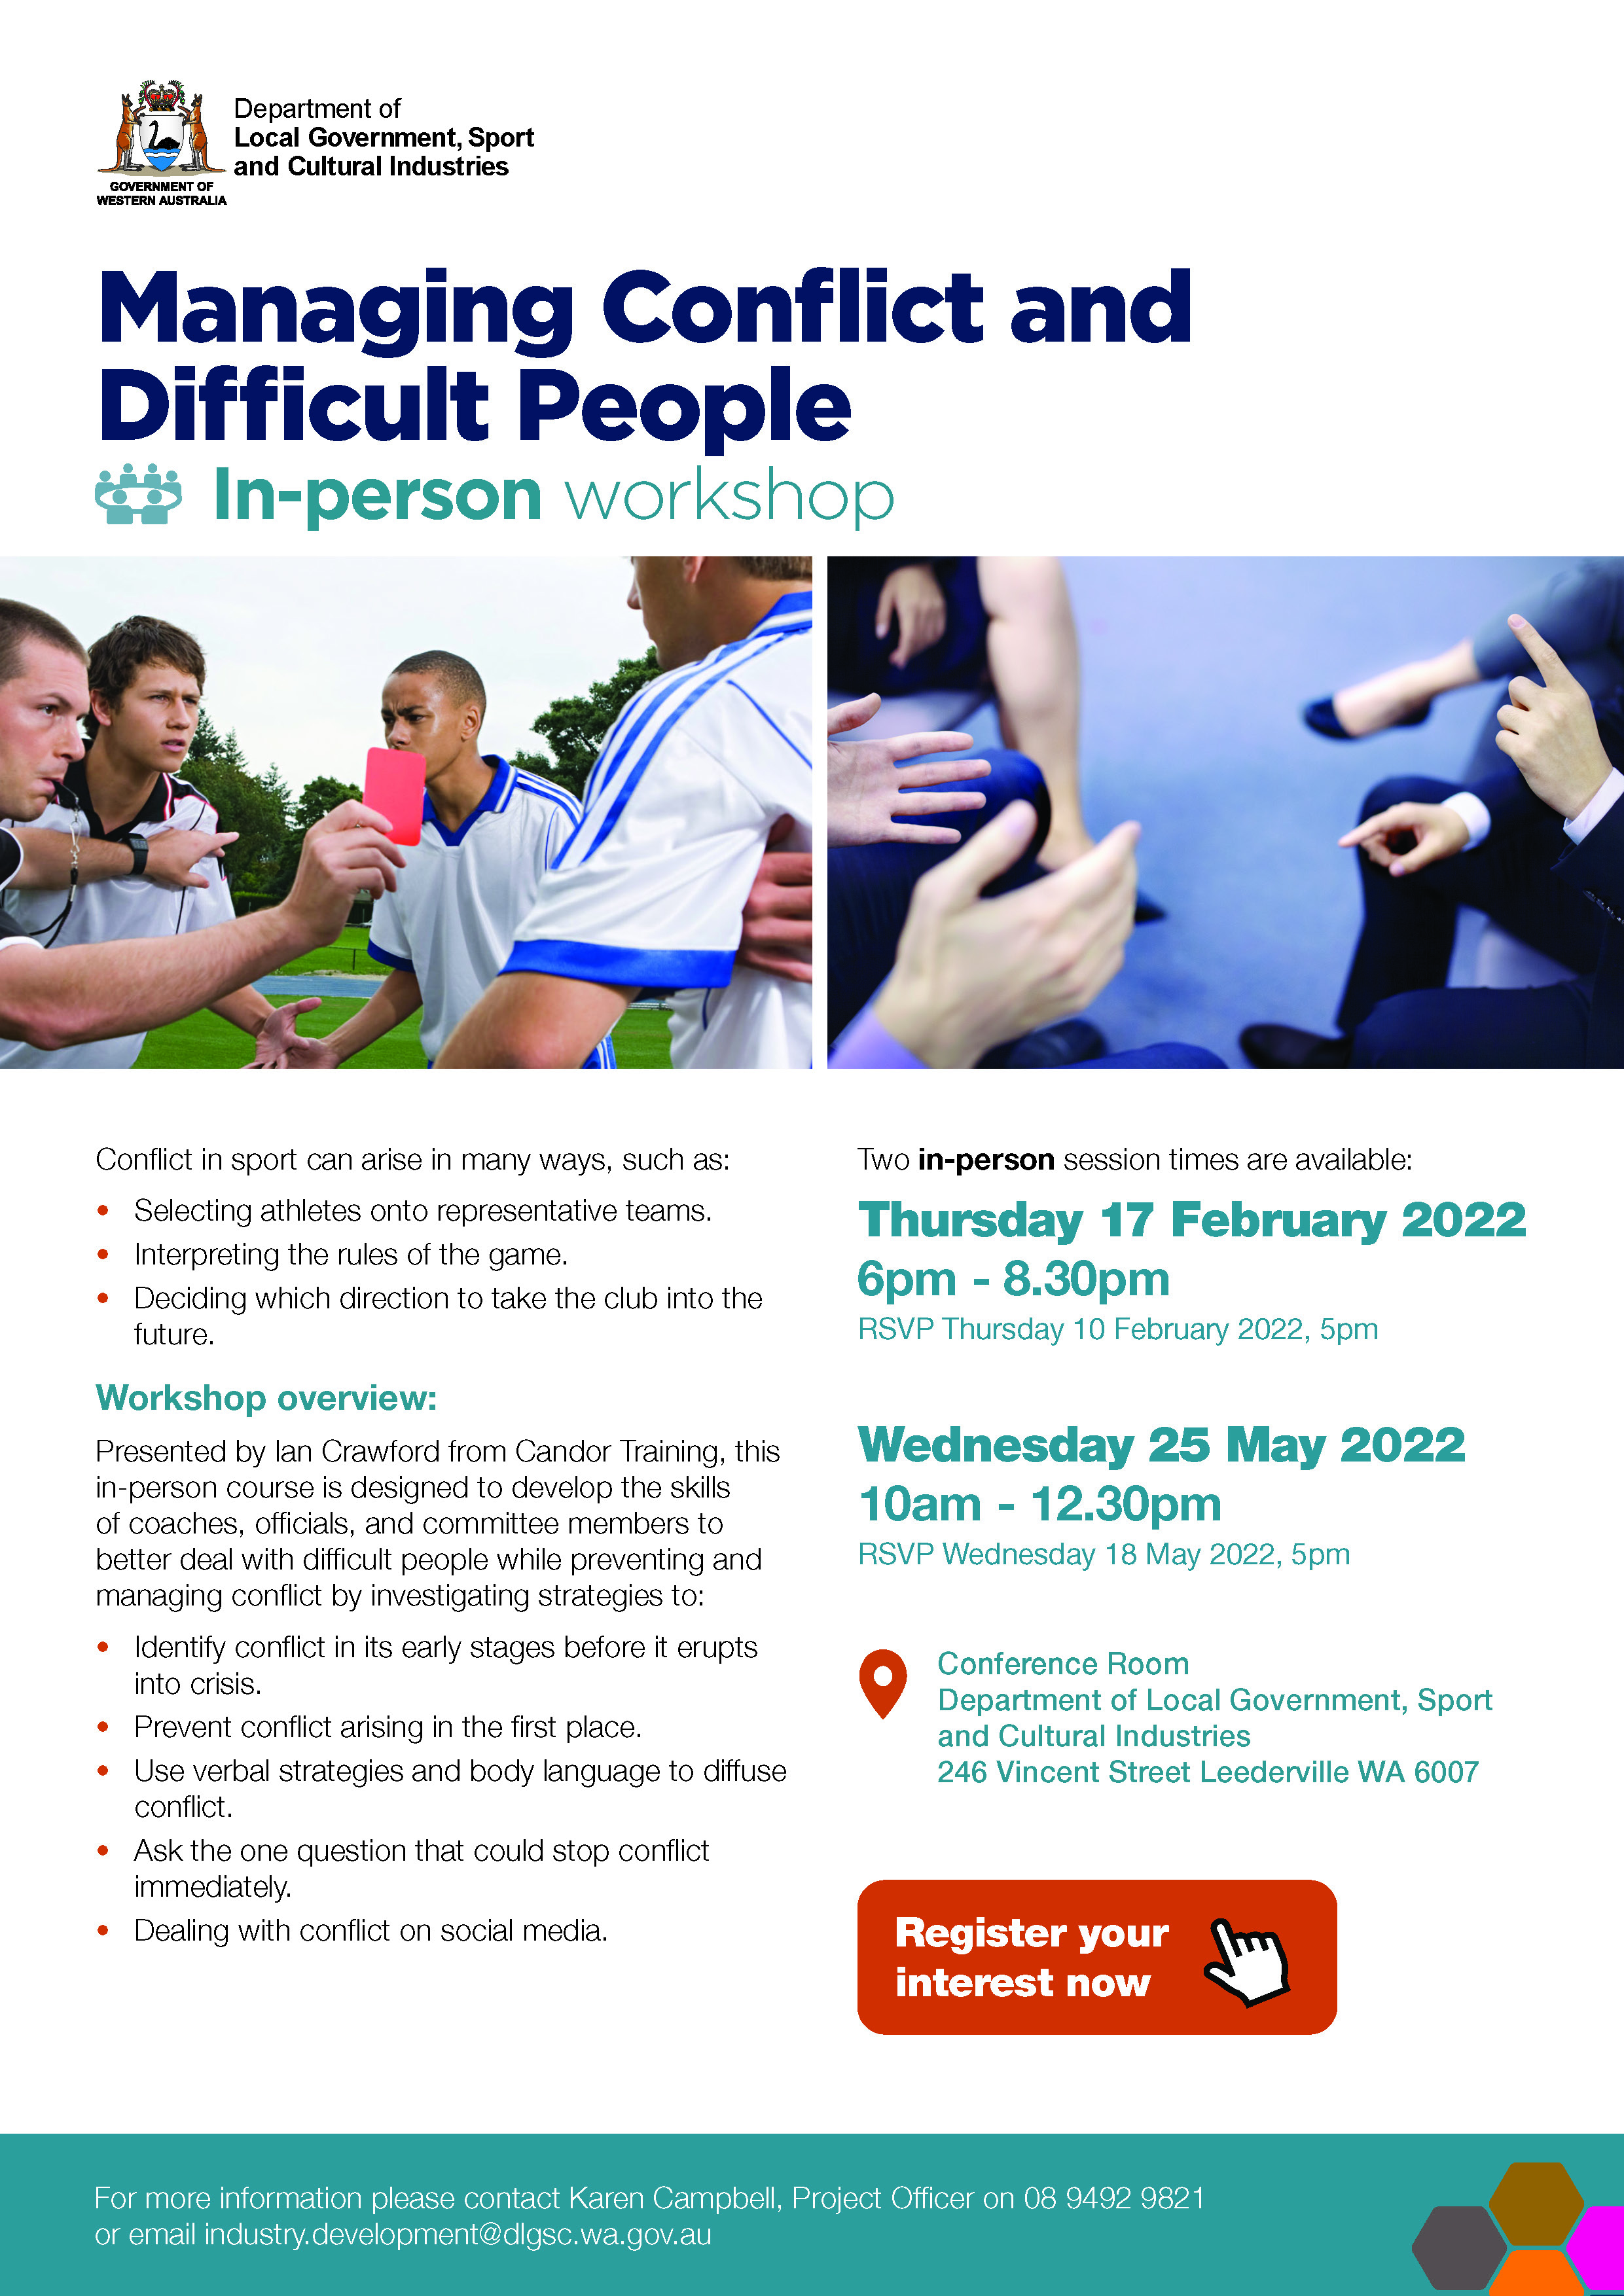 Managing Conflict and Difficult People In-person workshop flyer